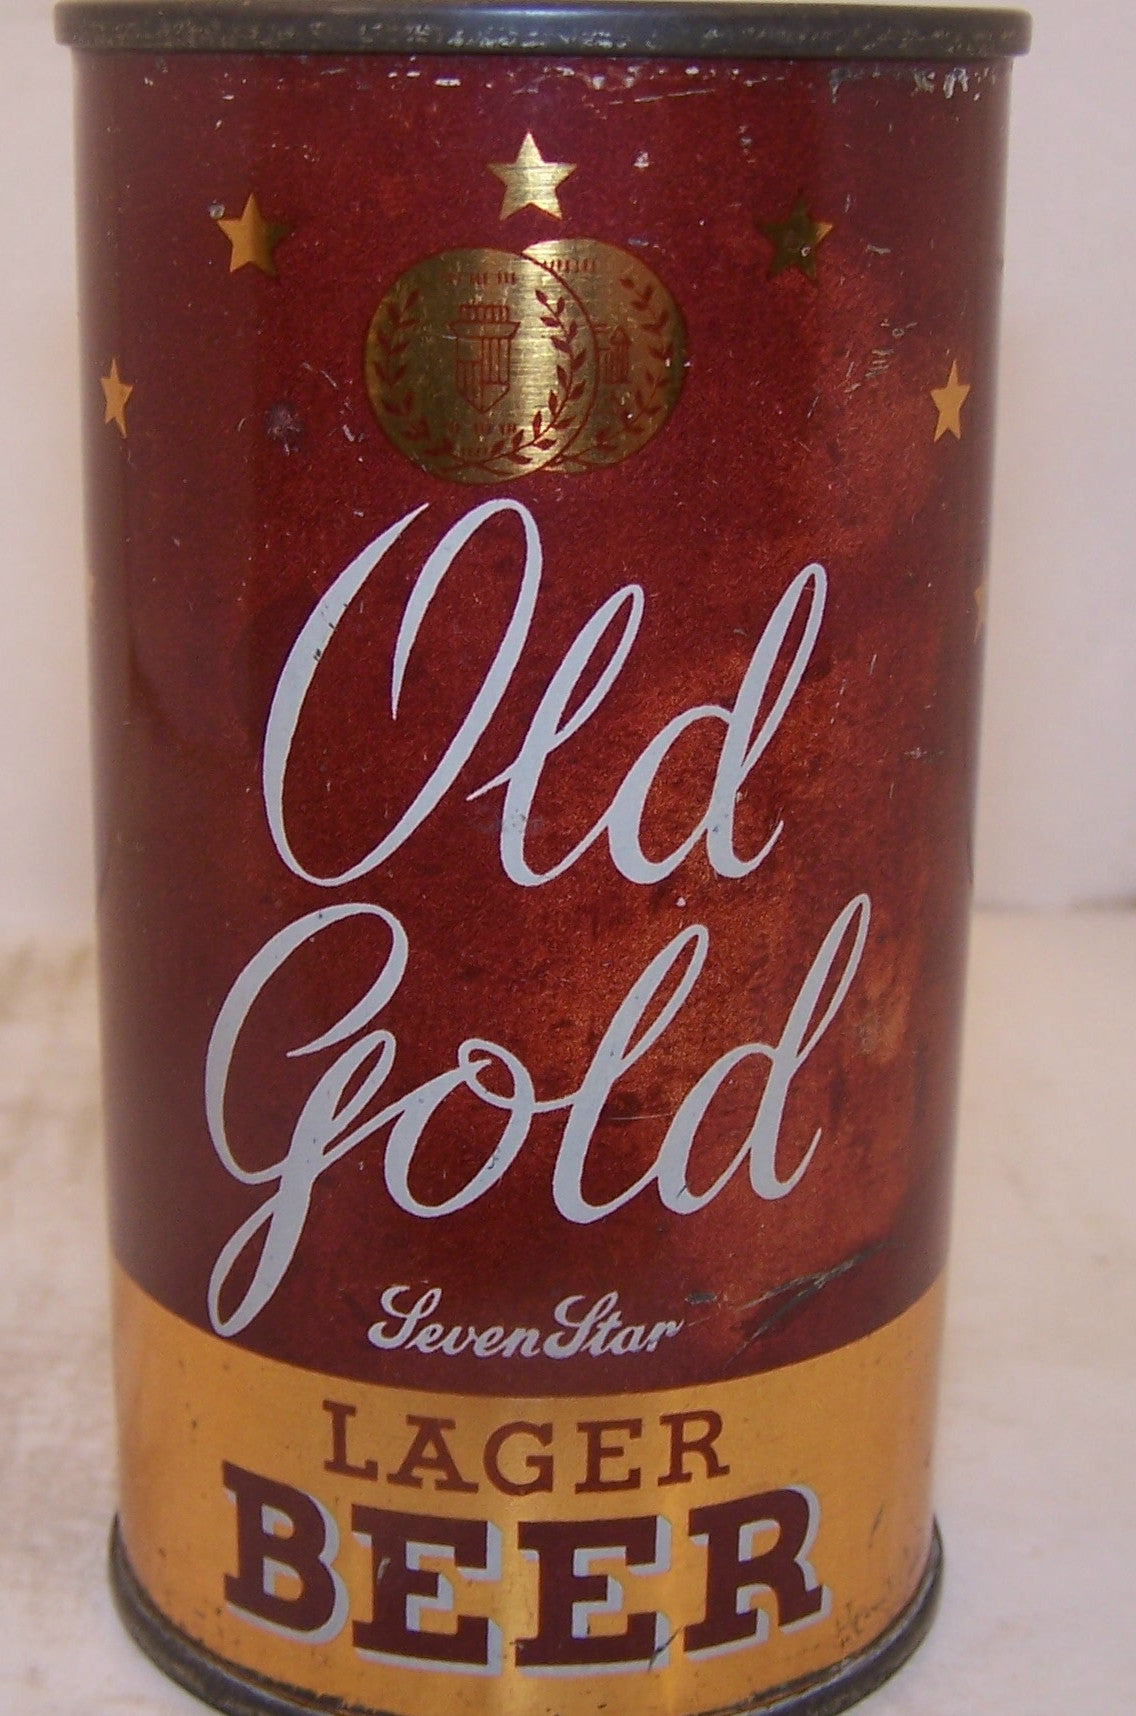 Old Gold Seven Star Lager Beer, Lilek page # 608, Grade 1-/2+ Sold 3/14/15